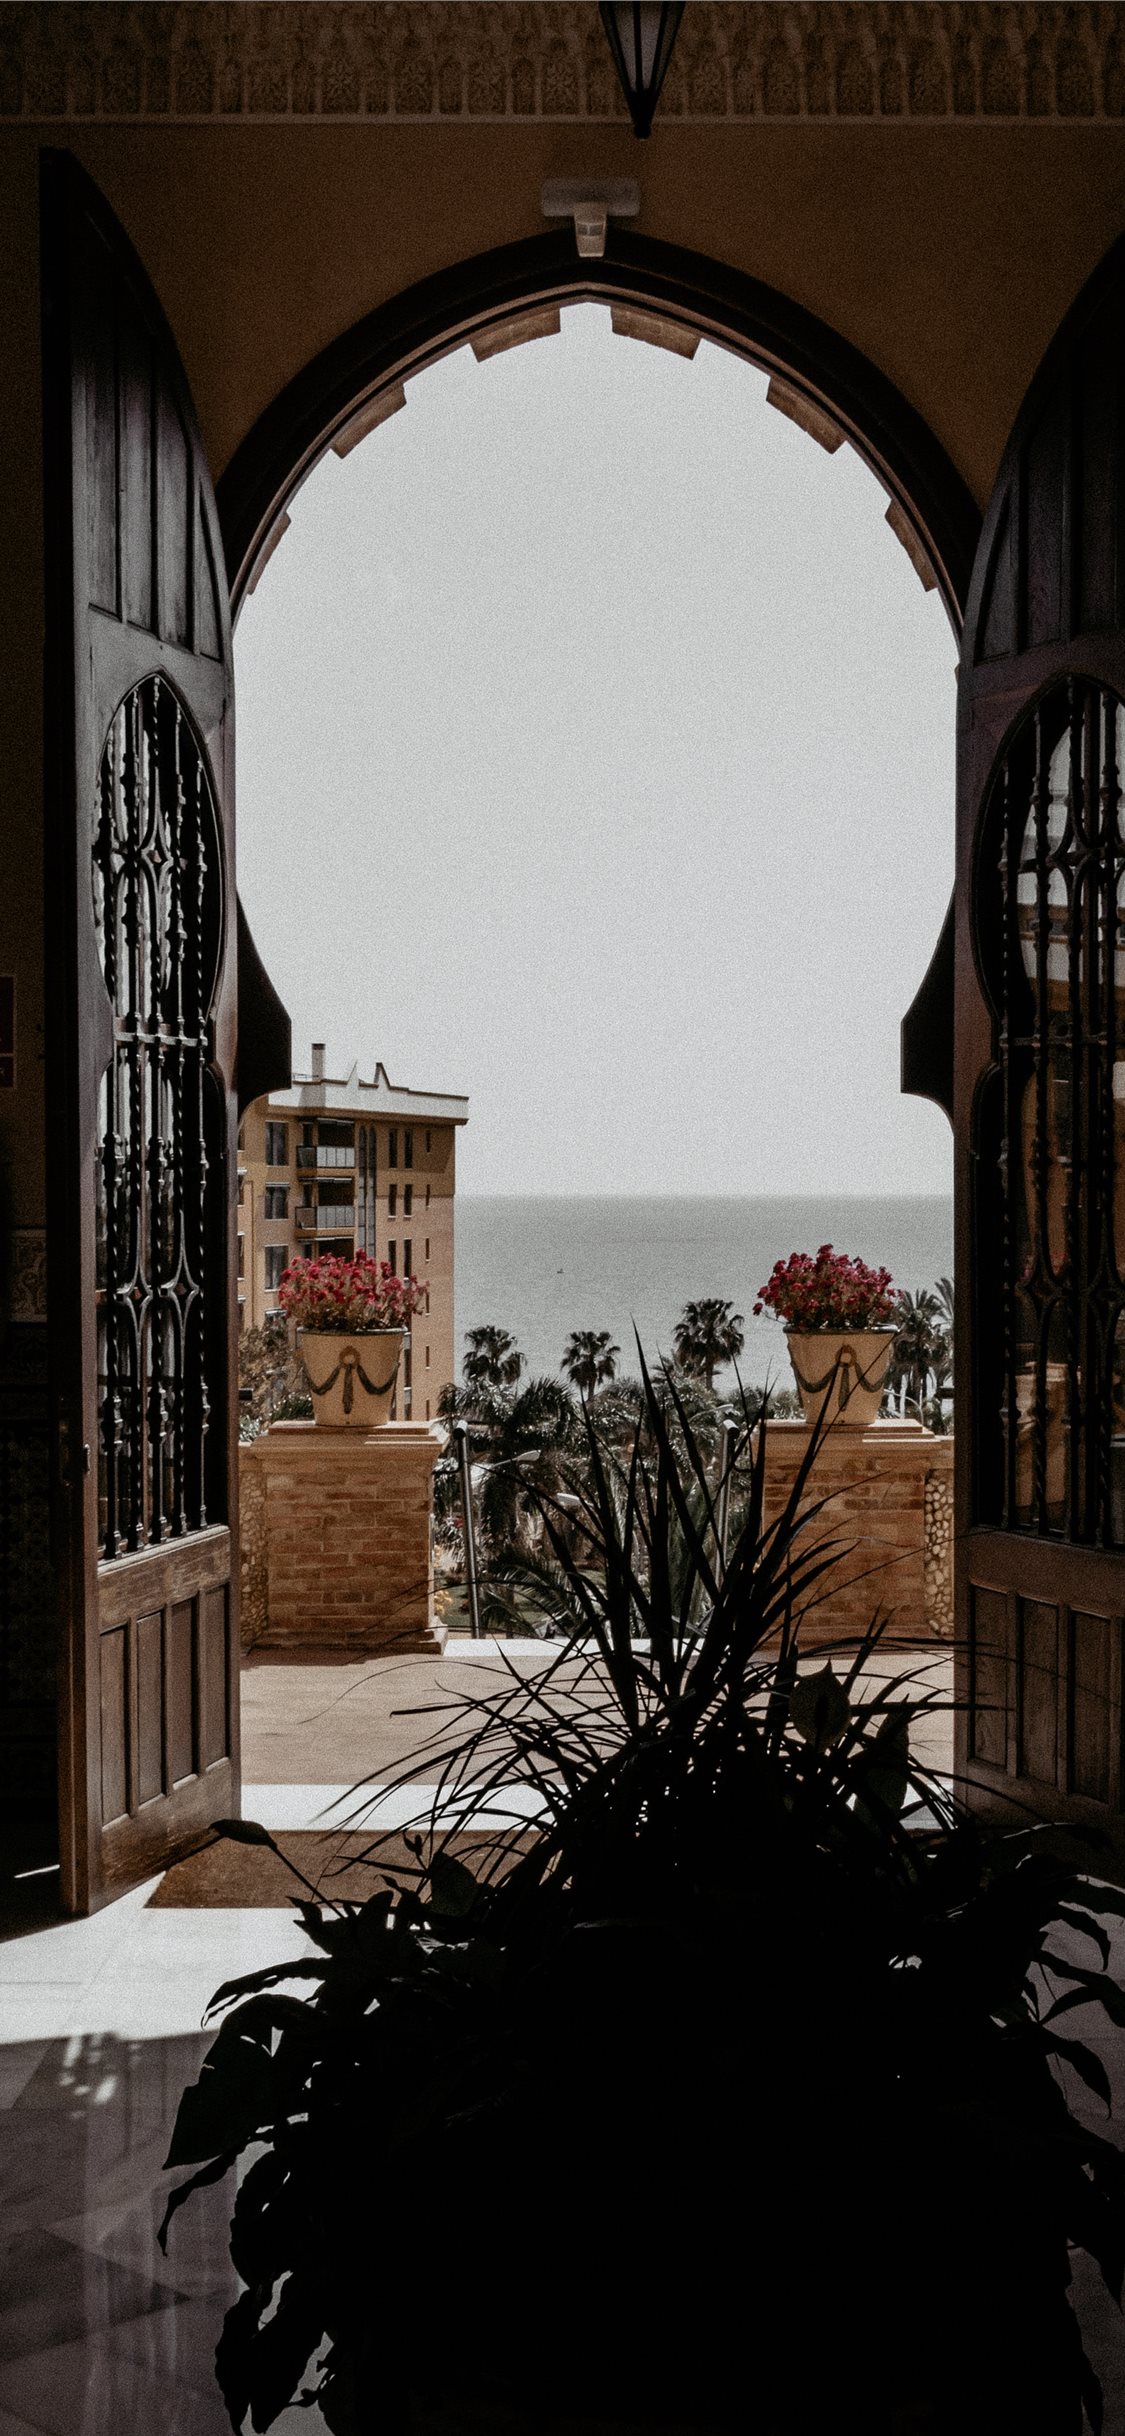 A view of the ocean through an open doorway with a potted plant in the foreground. - Architecture